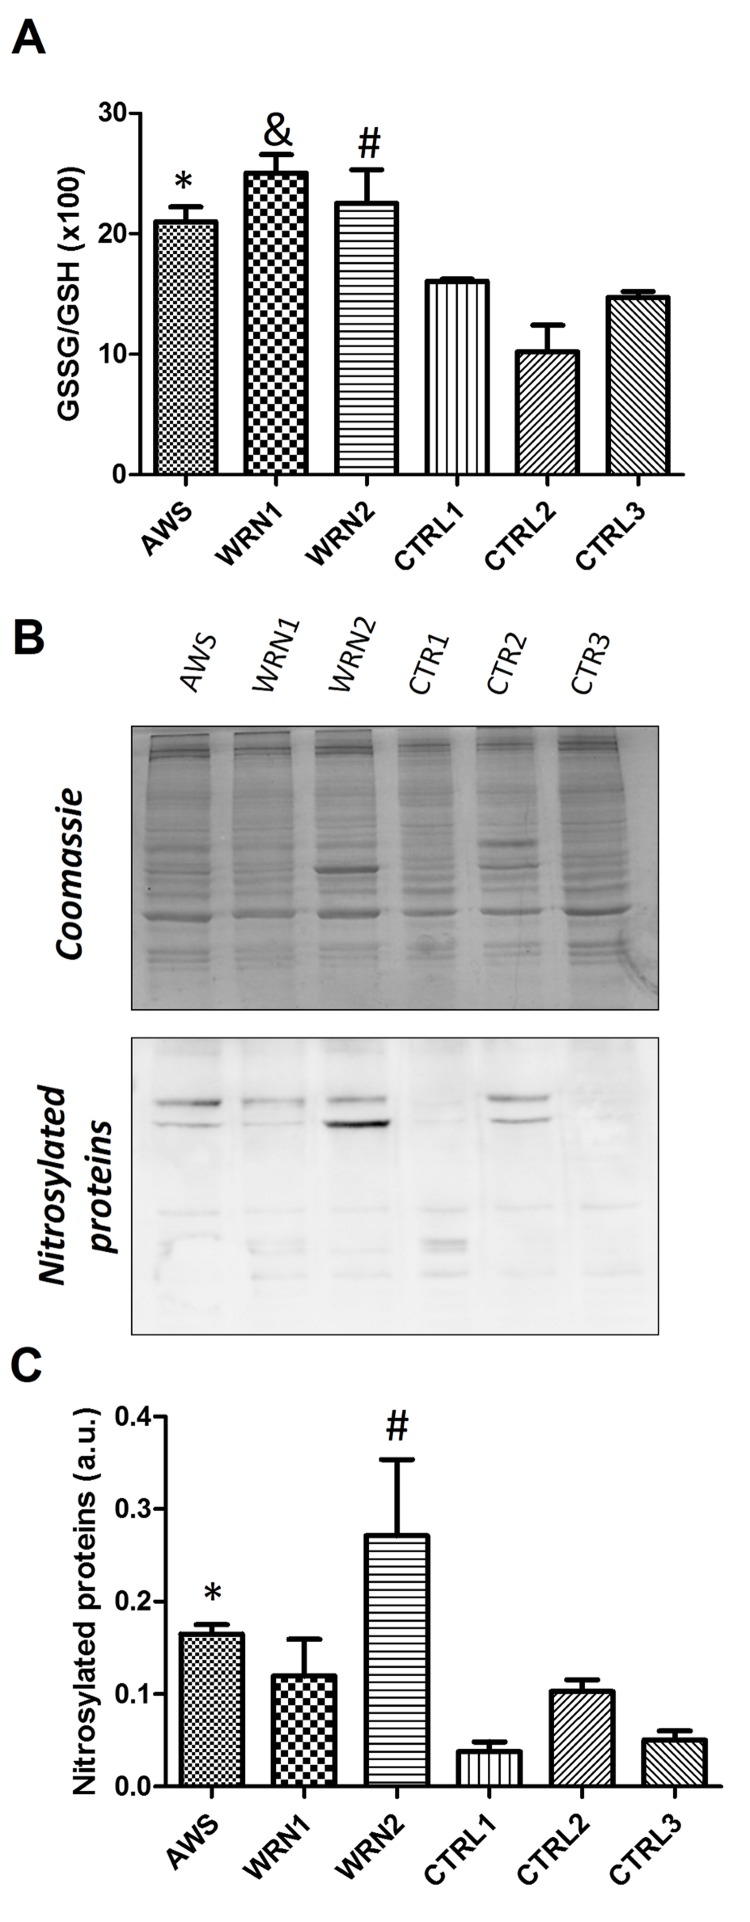 Analysis of the GSH antioxidant levels and Nitro-Tyr levels in atypical Werner syndrome and Werner syndrome fibroblasts